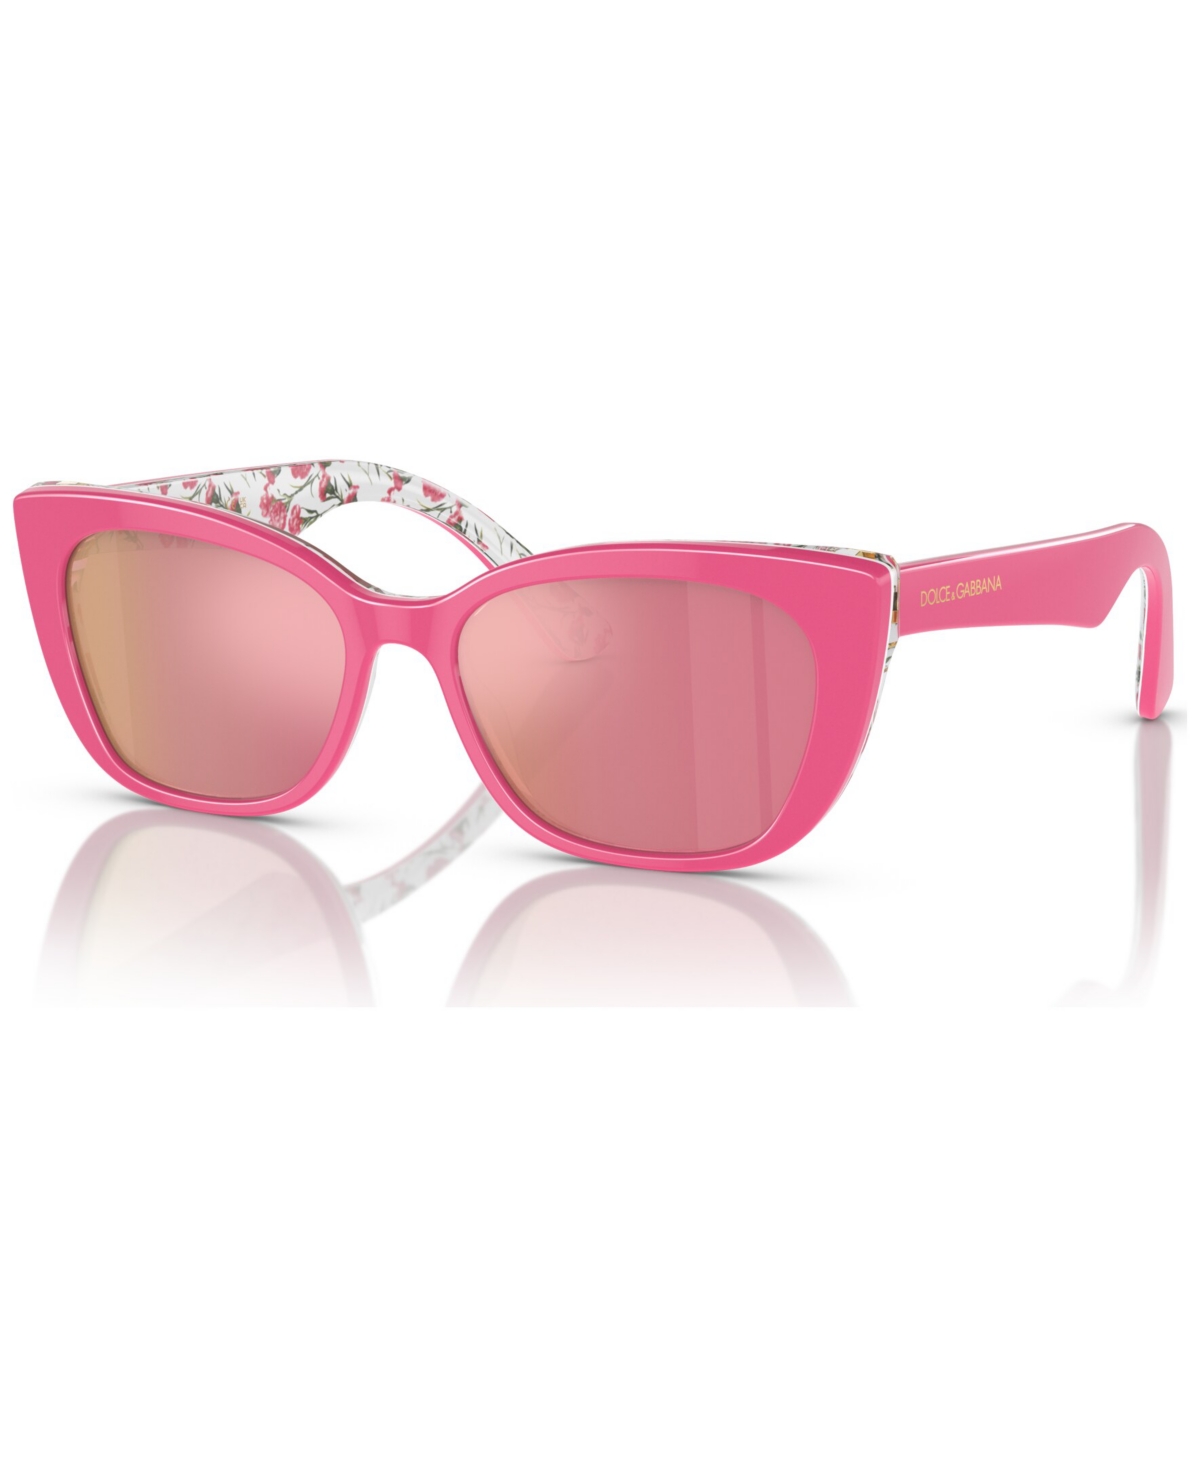 Dolce & Gabbana Kids Sunglasses, Dx4427 (ages 7-10) In Pink On Pink Flowers